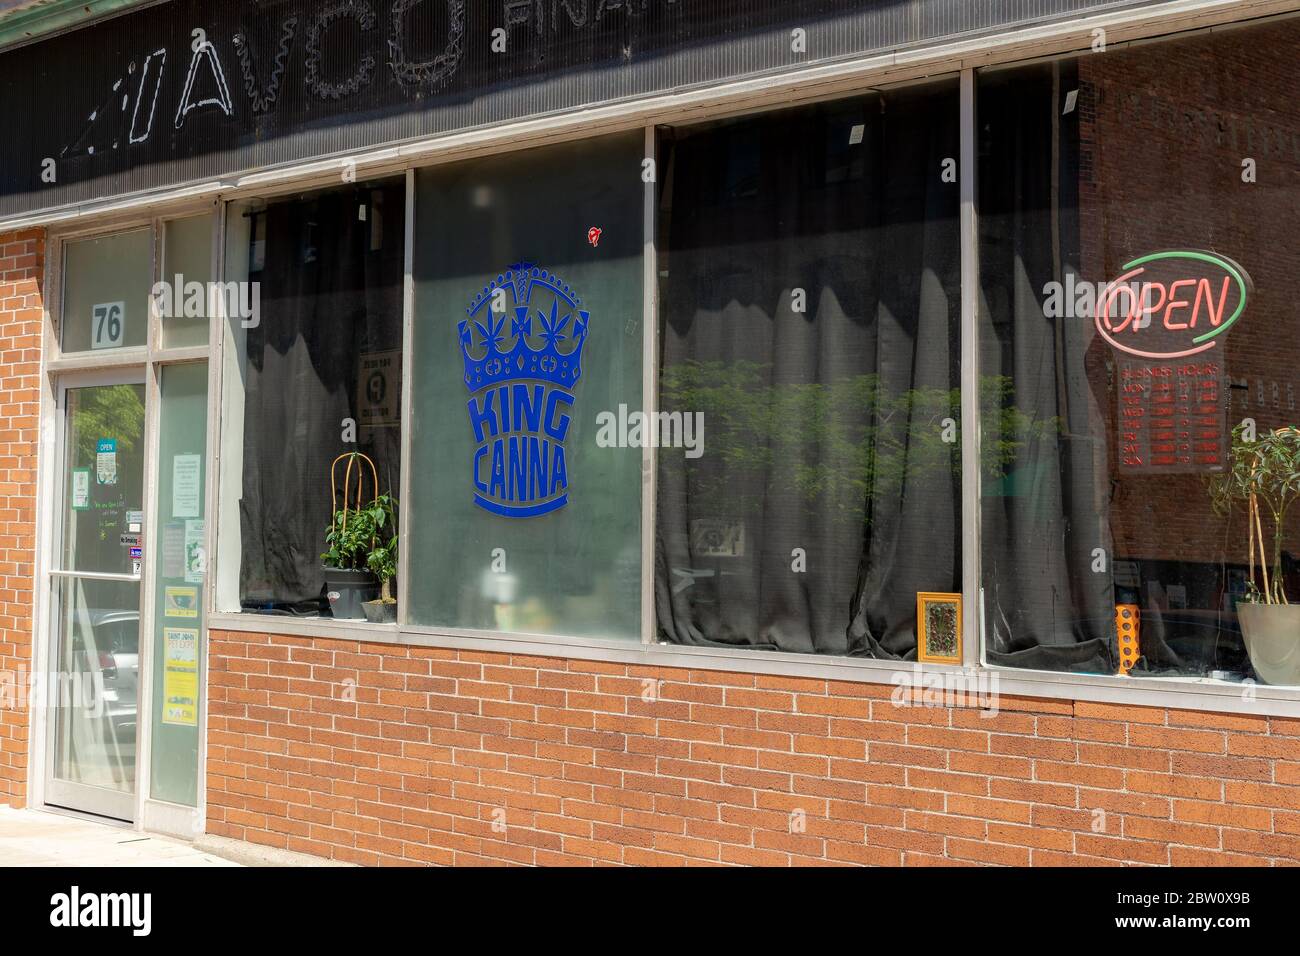 Saint John, NB, Canada - July 20, 2019: King Canna is an unlicensed cannabis dispensary. There is a neon 'OPEN' sign in the window. Unlicensed cannabi Stock Photo